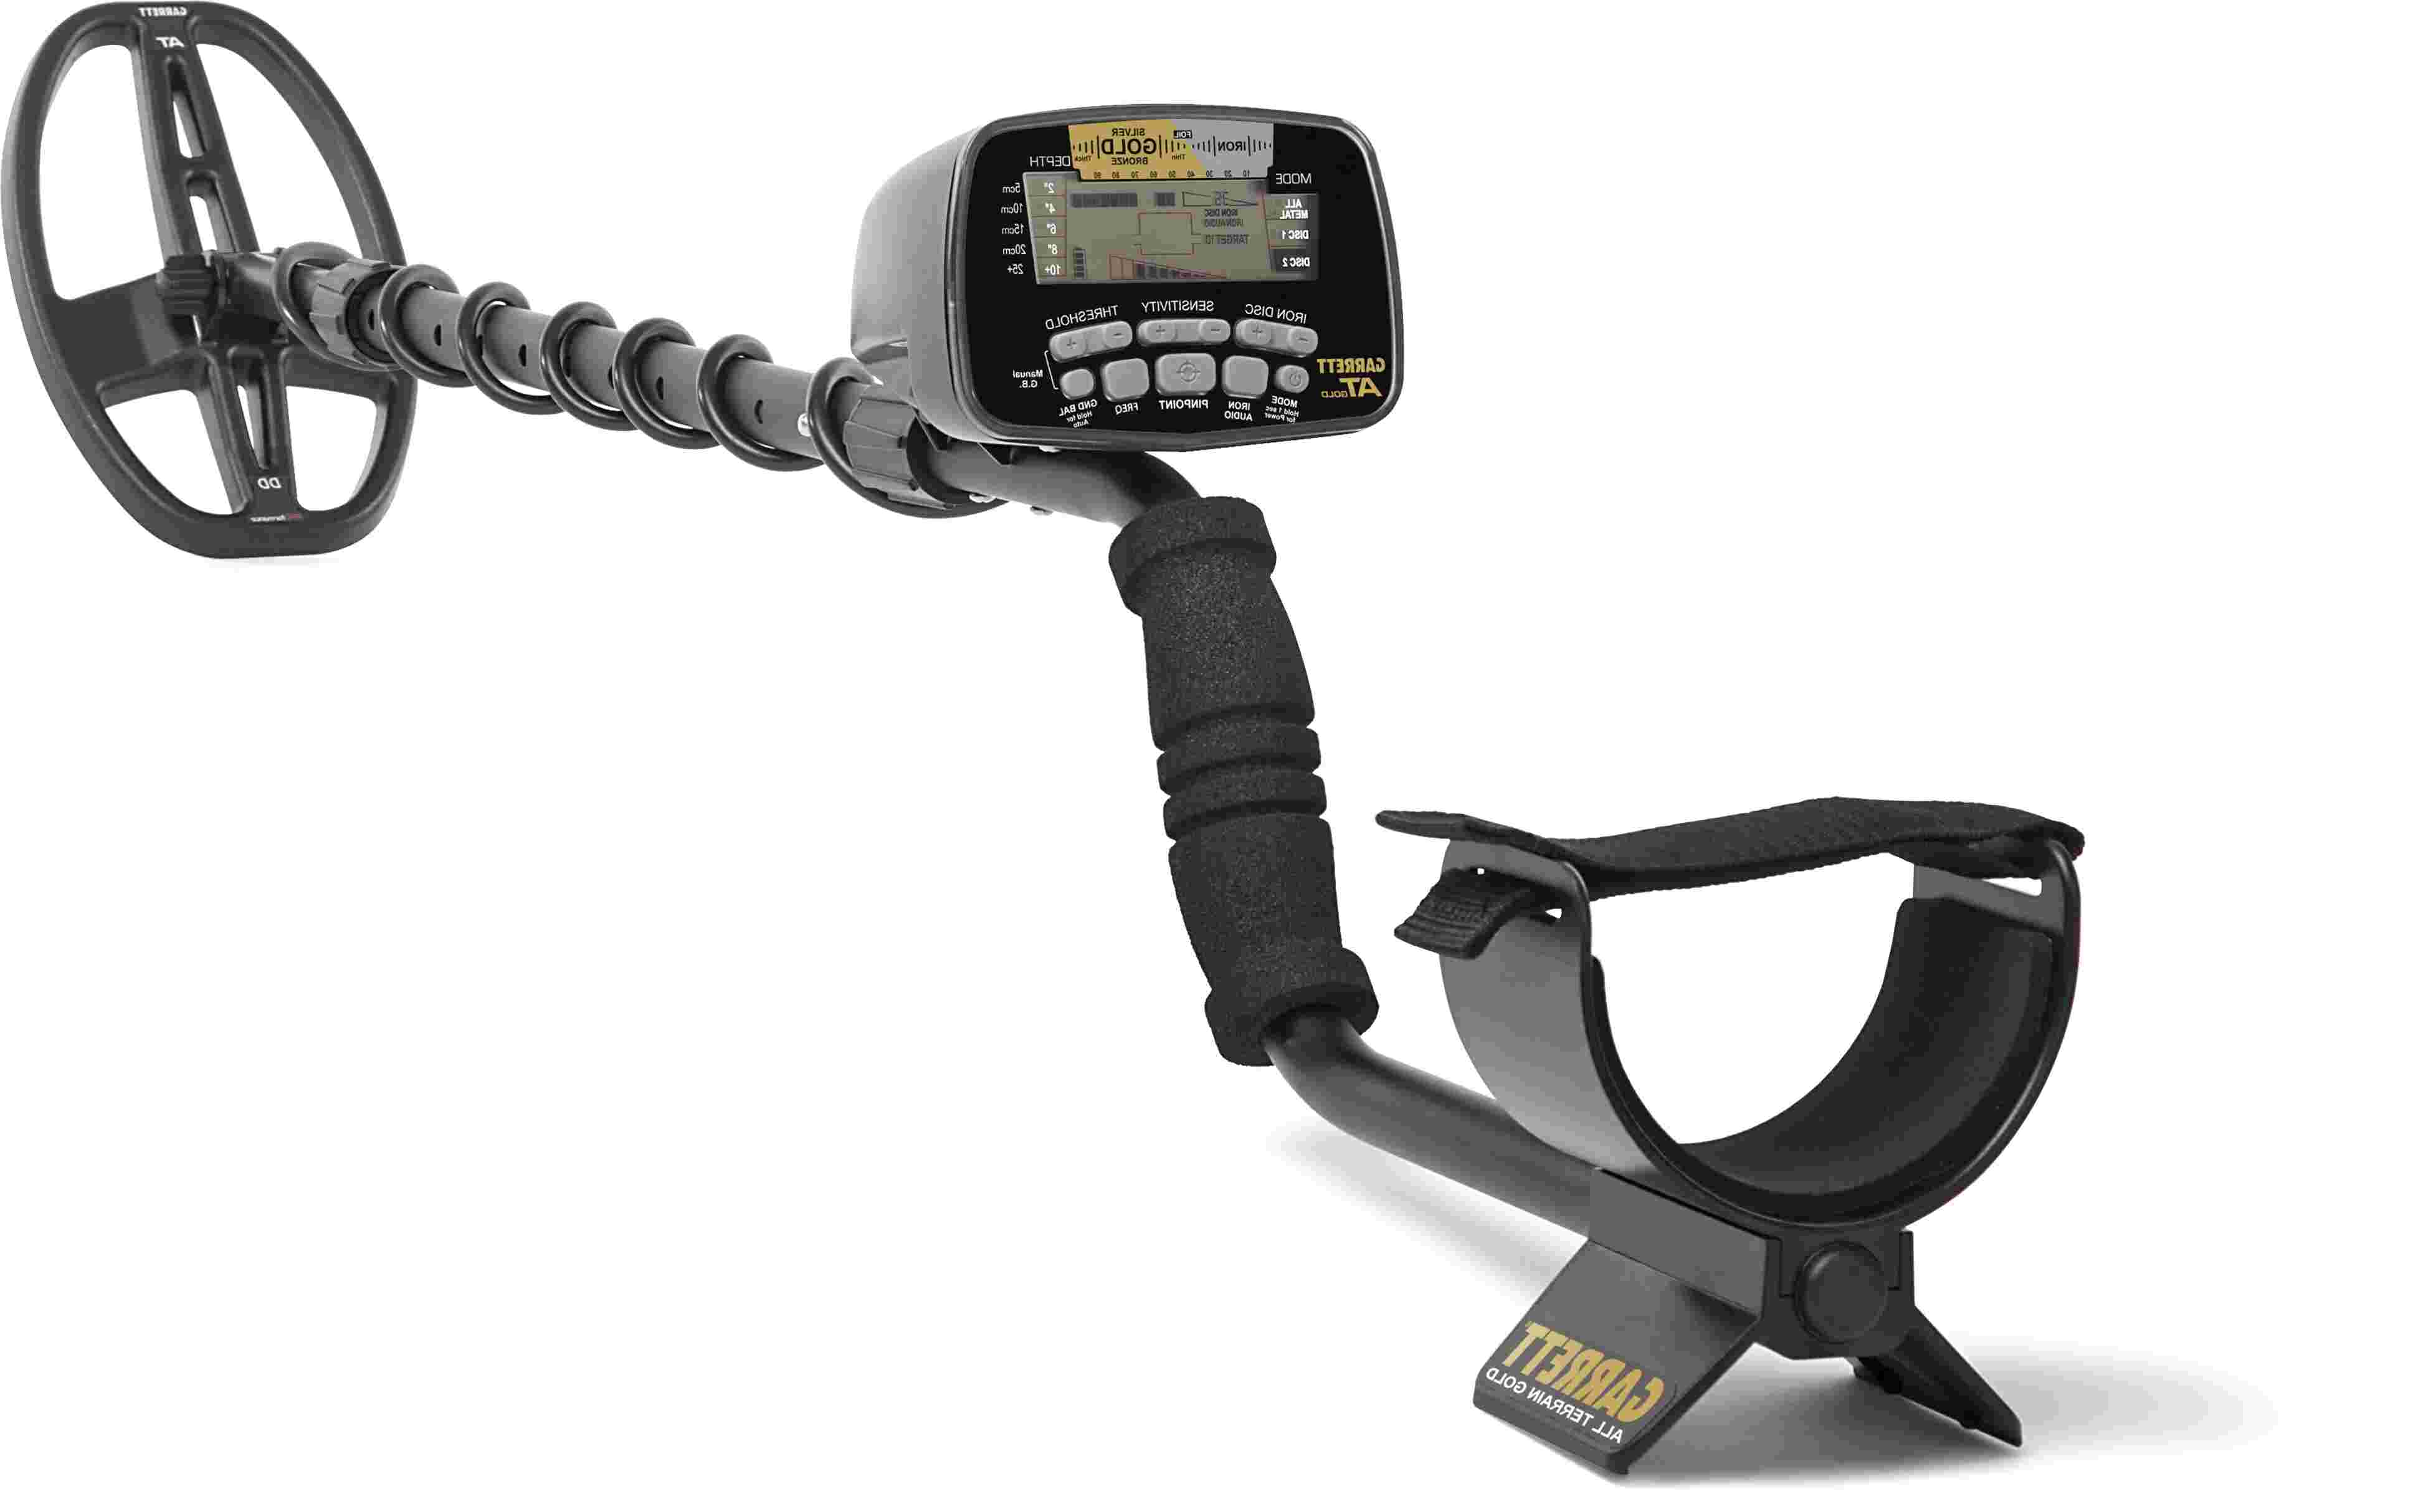 White 6000 Di Pro Metal Detector : While detectors have become lighter